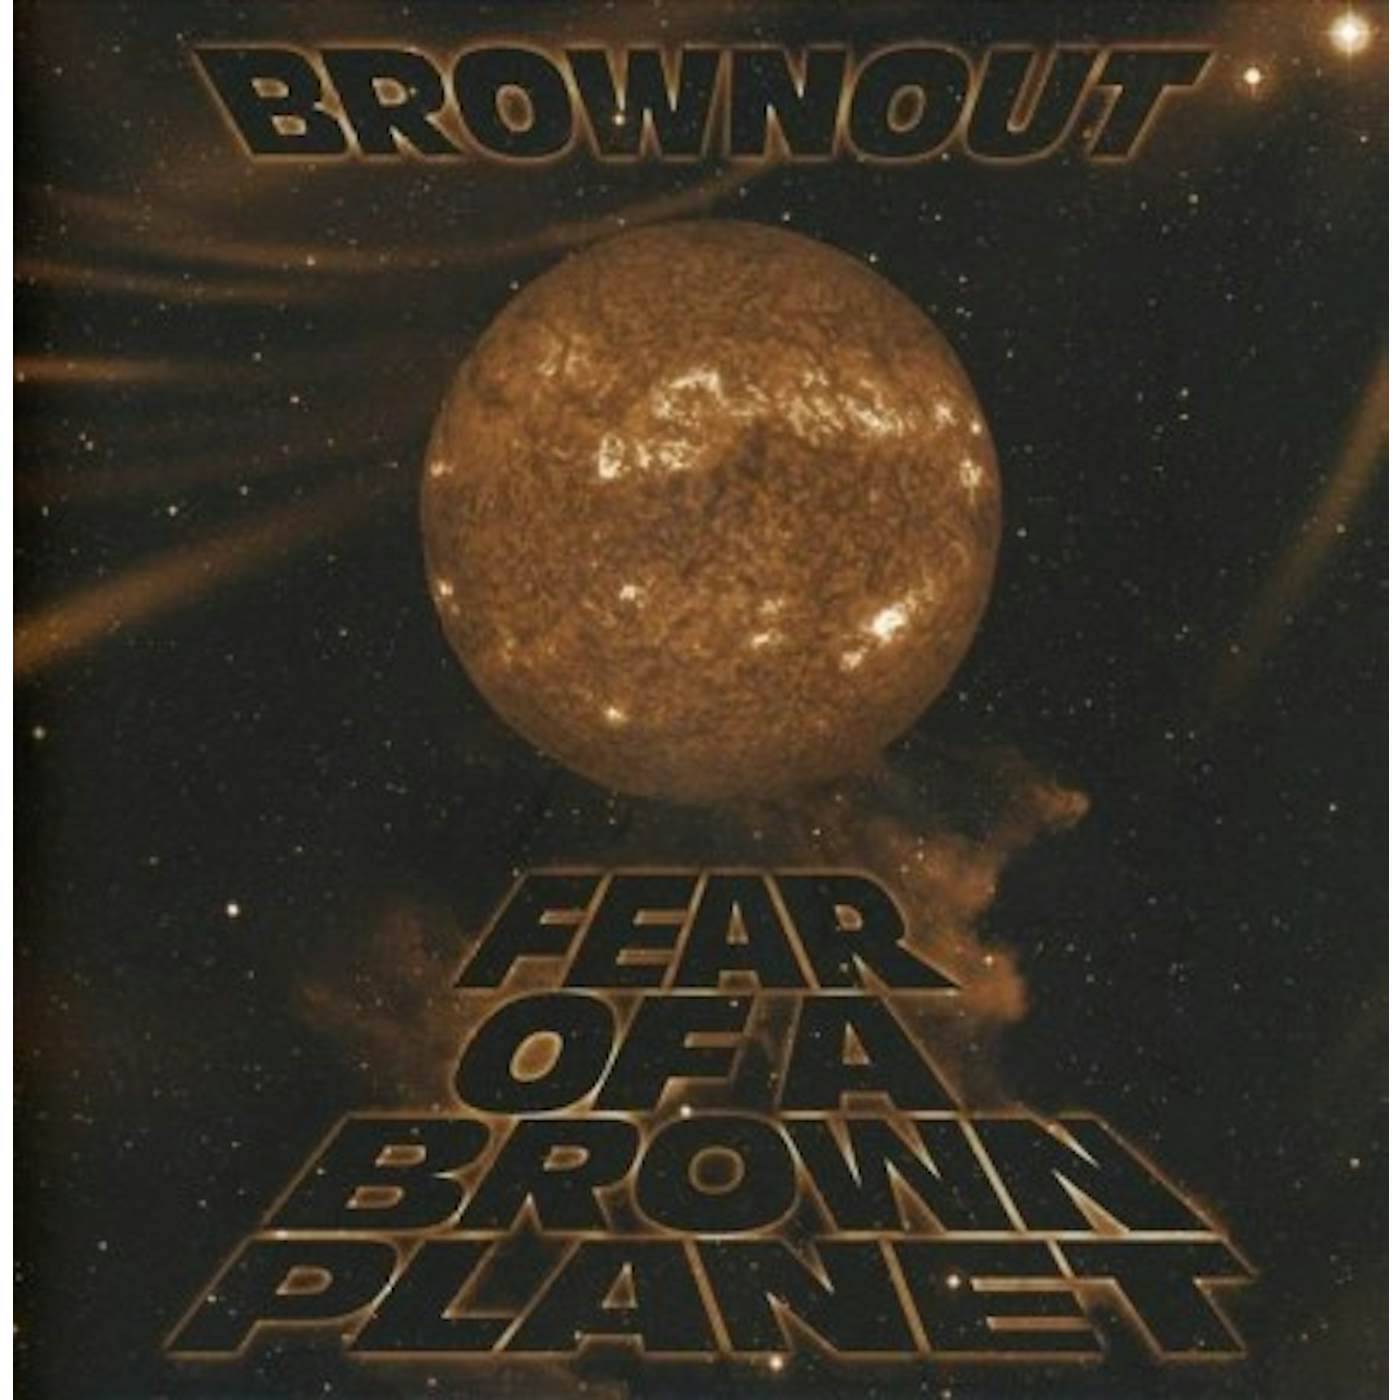 Brownout FEAR OF A BROWN PLANET CD